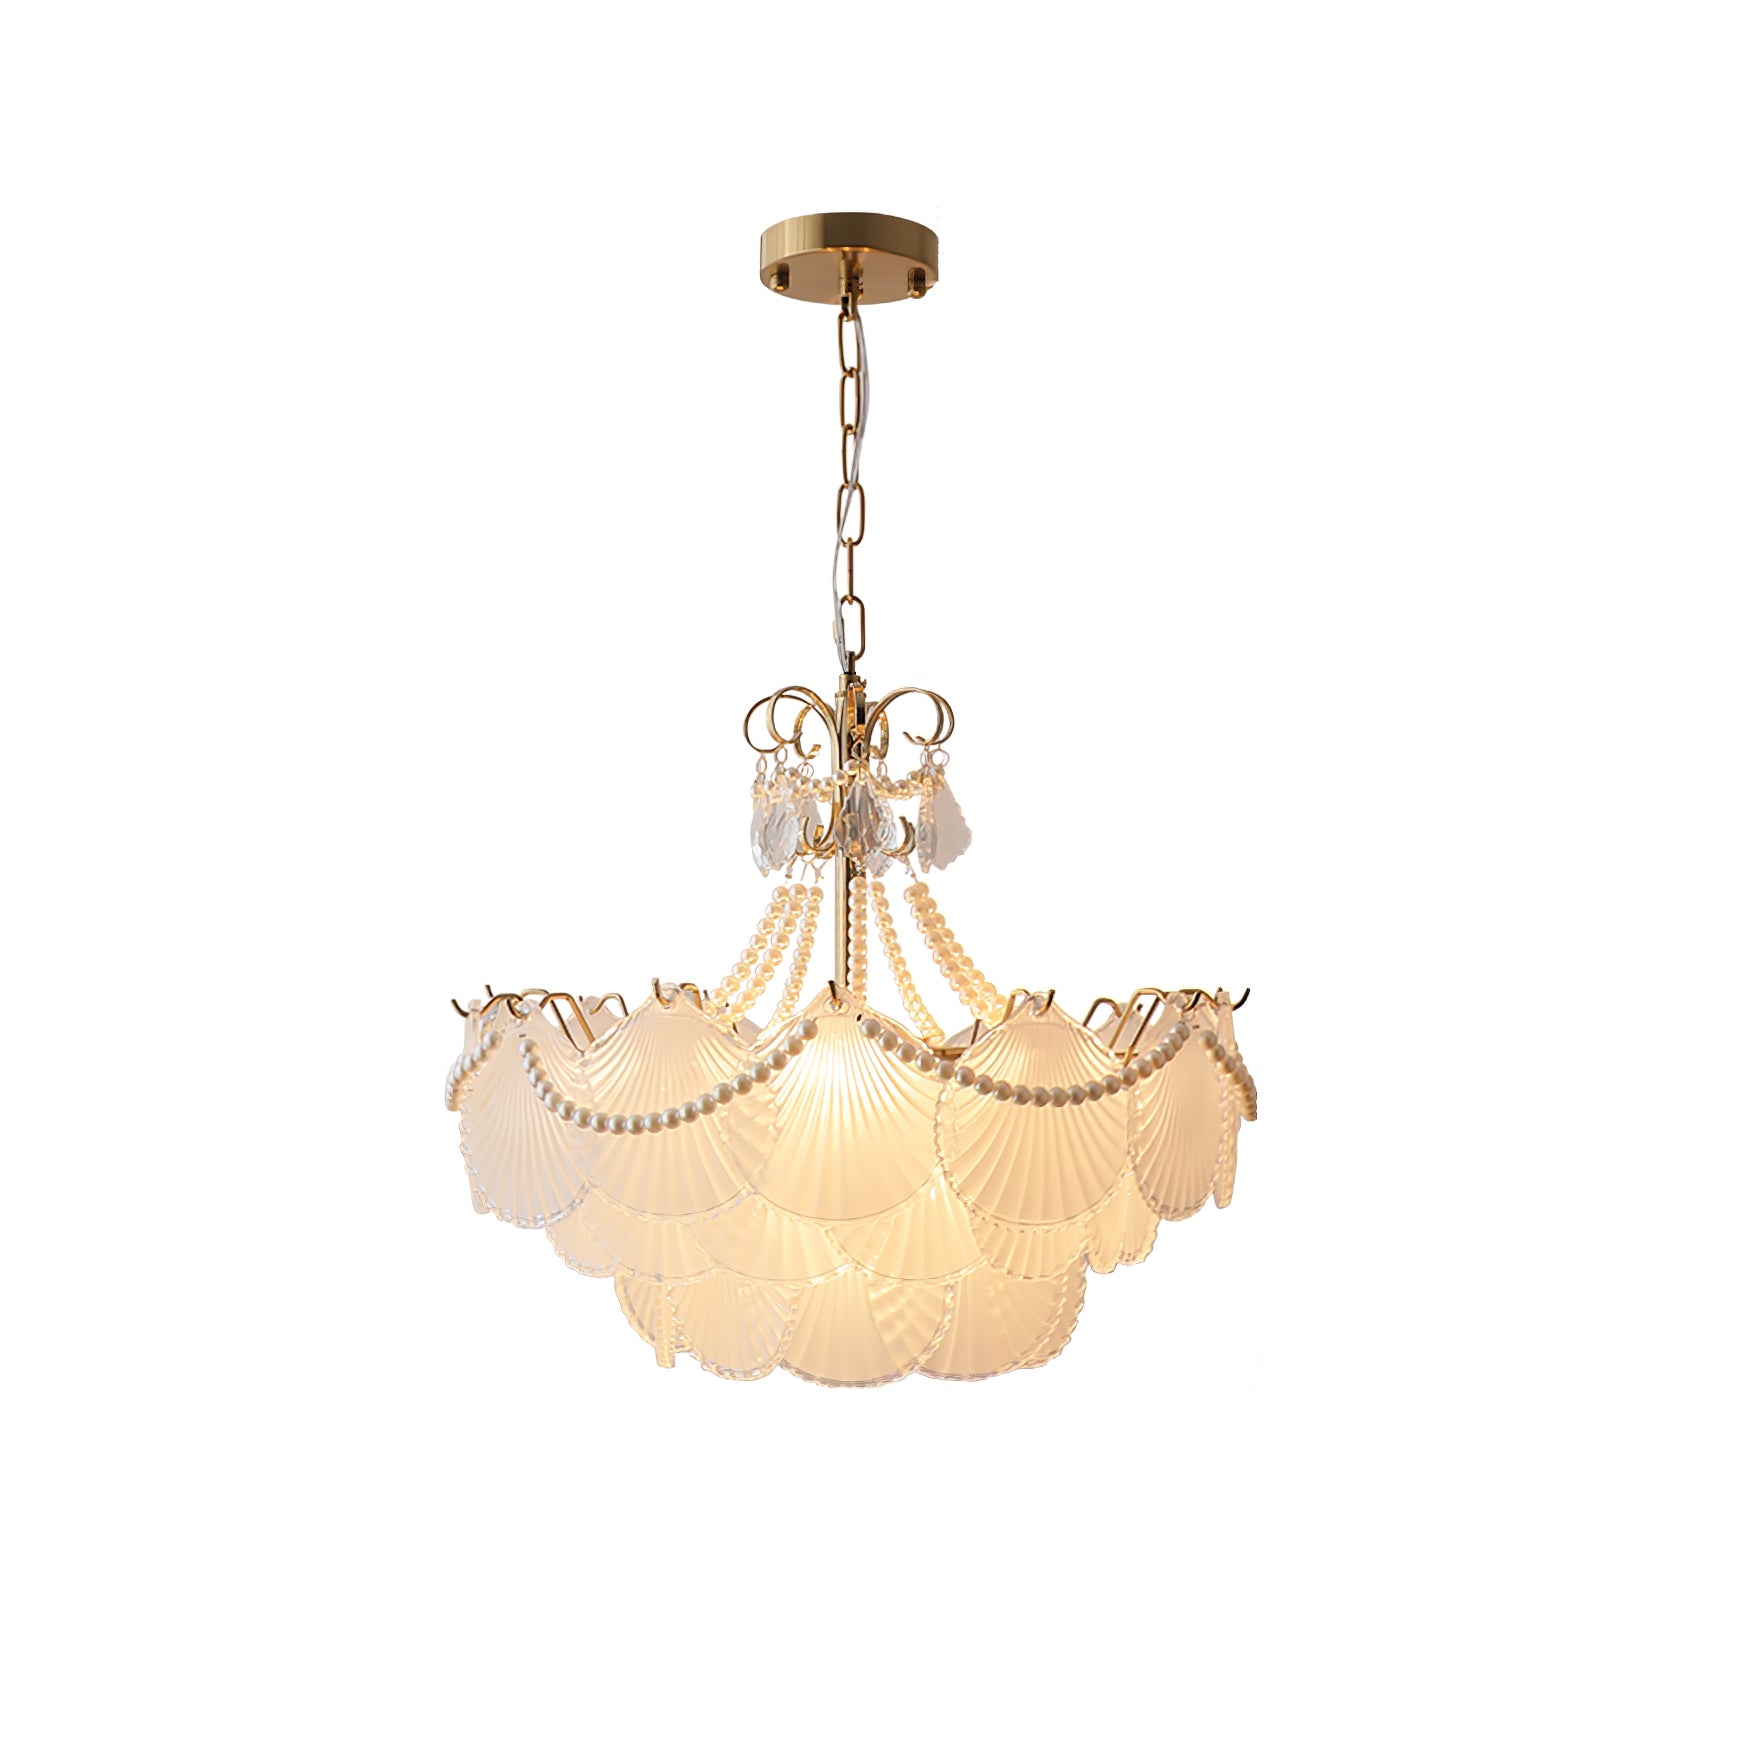 Shell Shade Crystal Chandelier